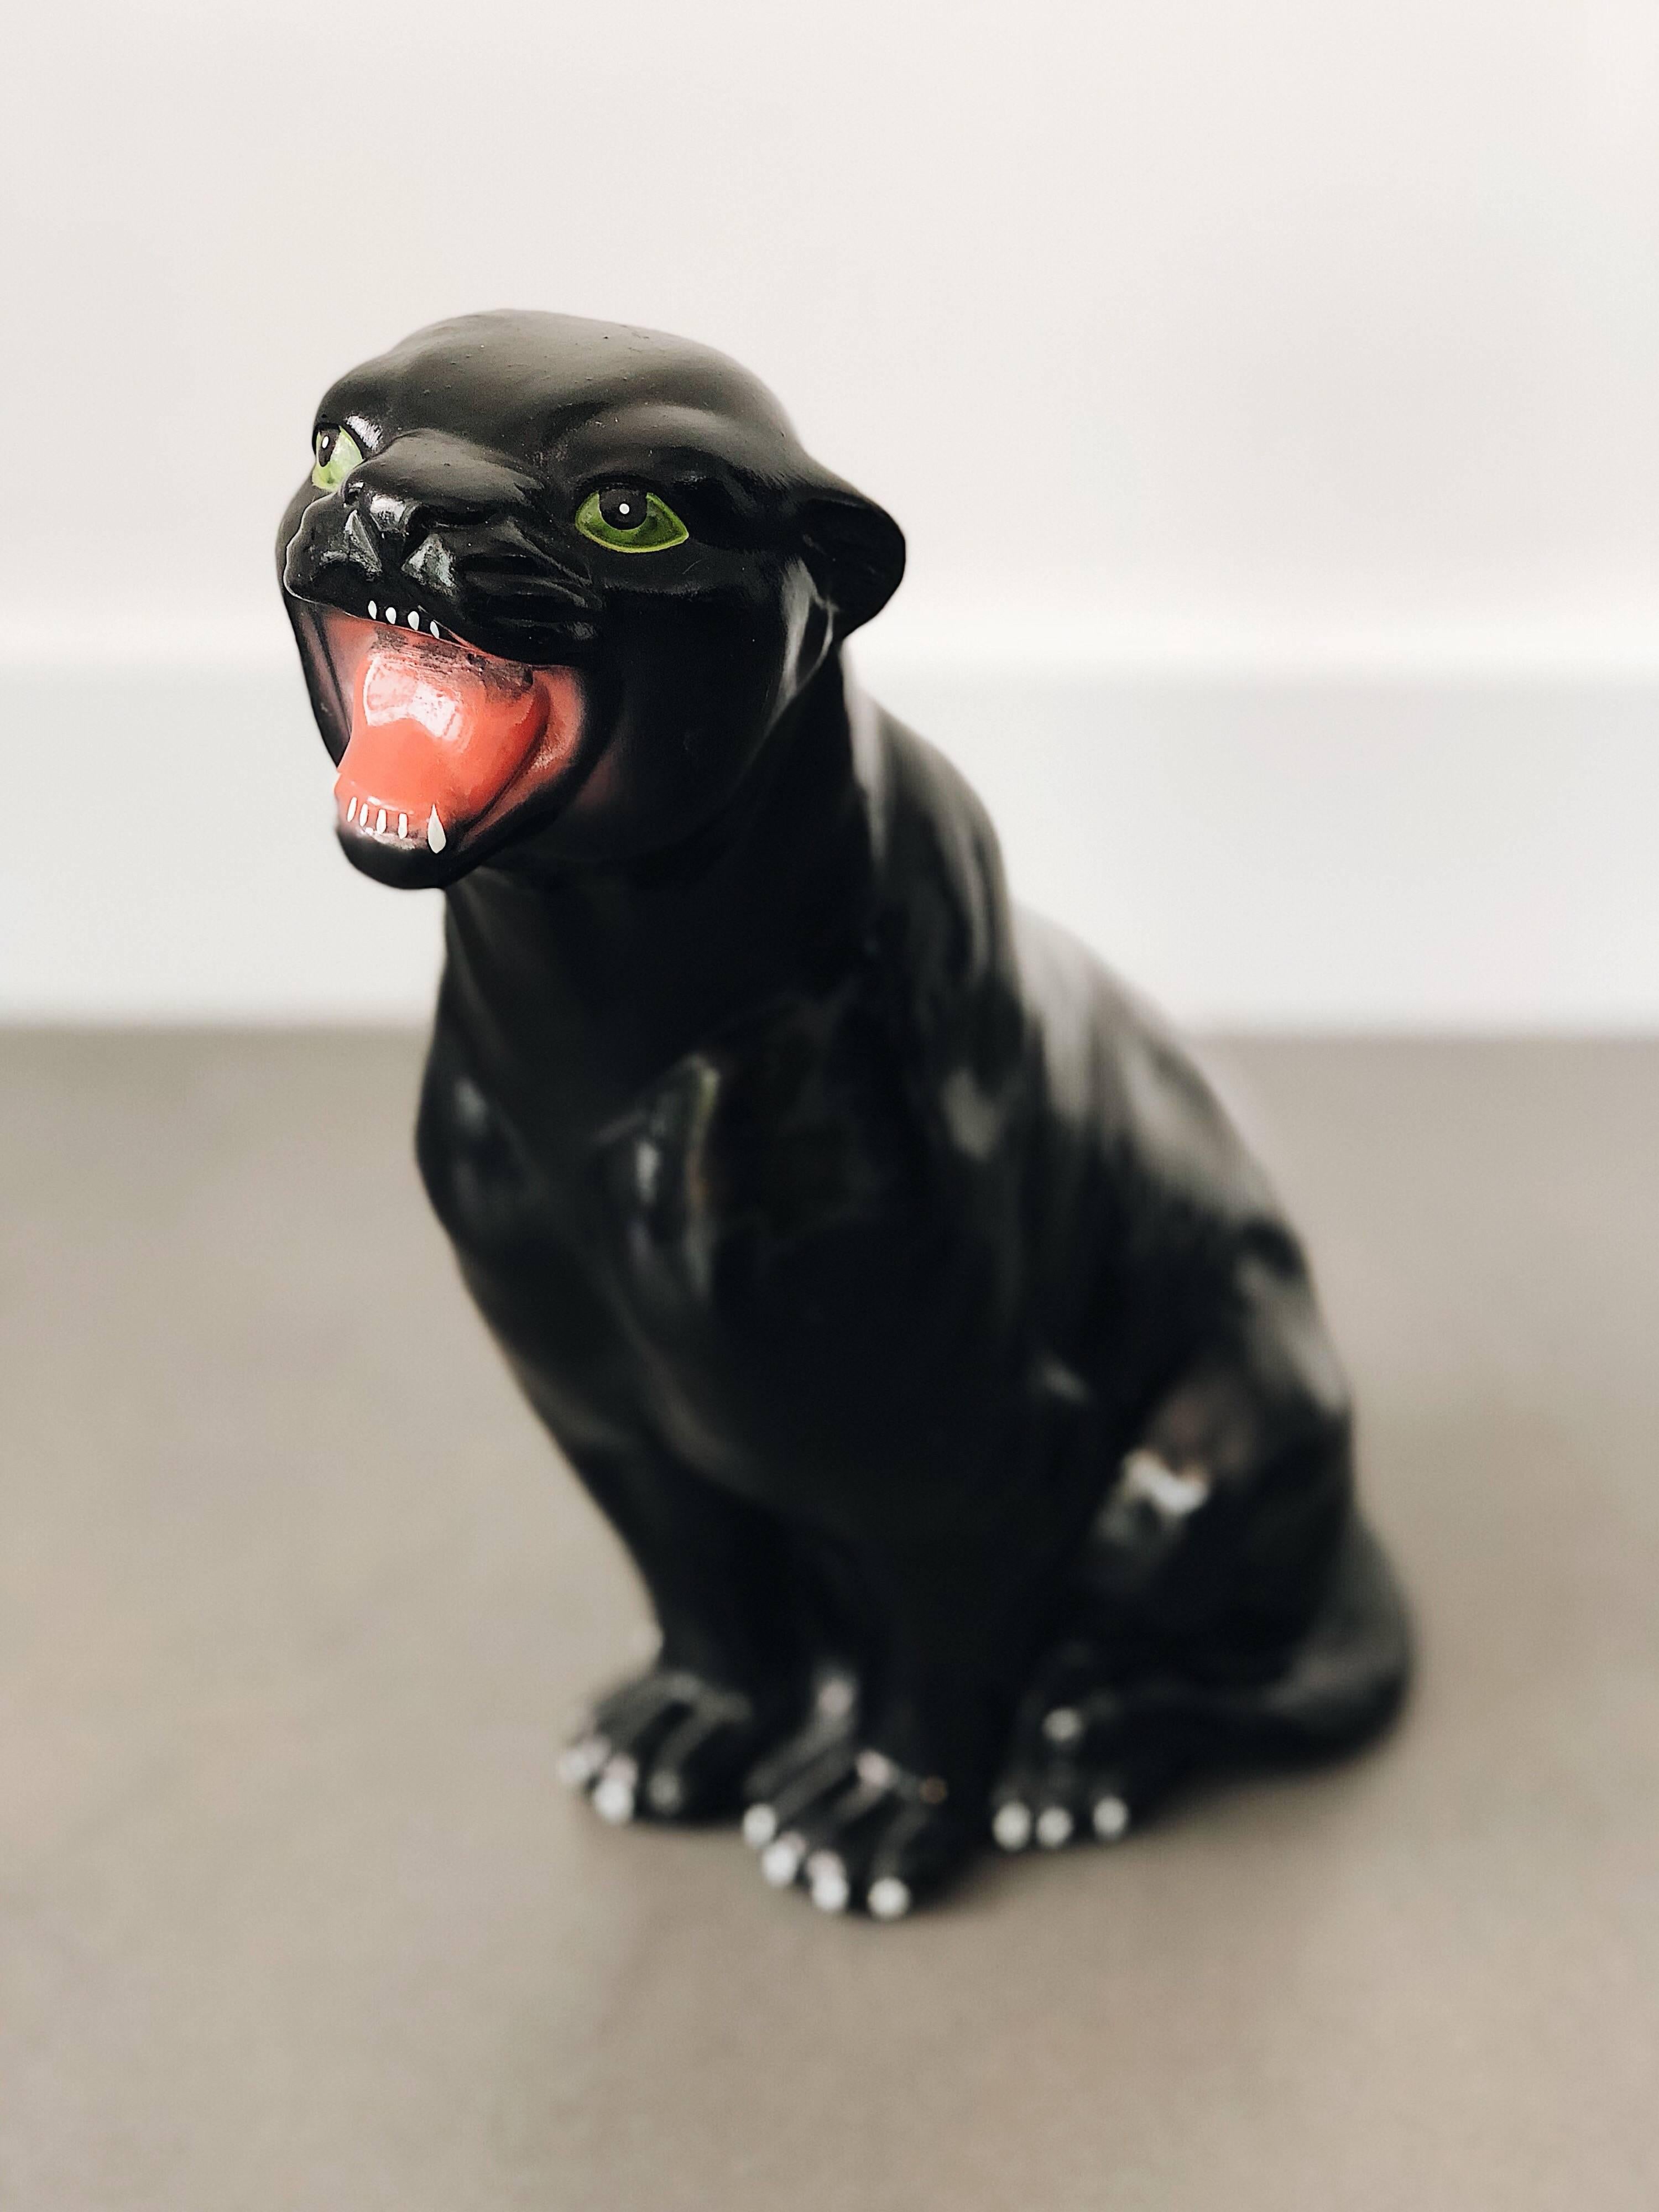 Italian ceramic, perfect condition, produced in 1960s. We have also medium and large black panthers, check our products.